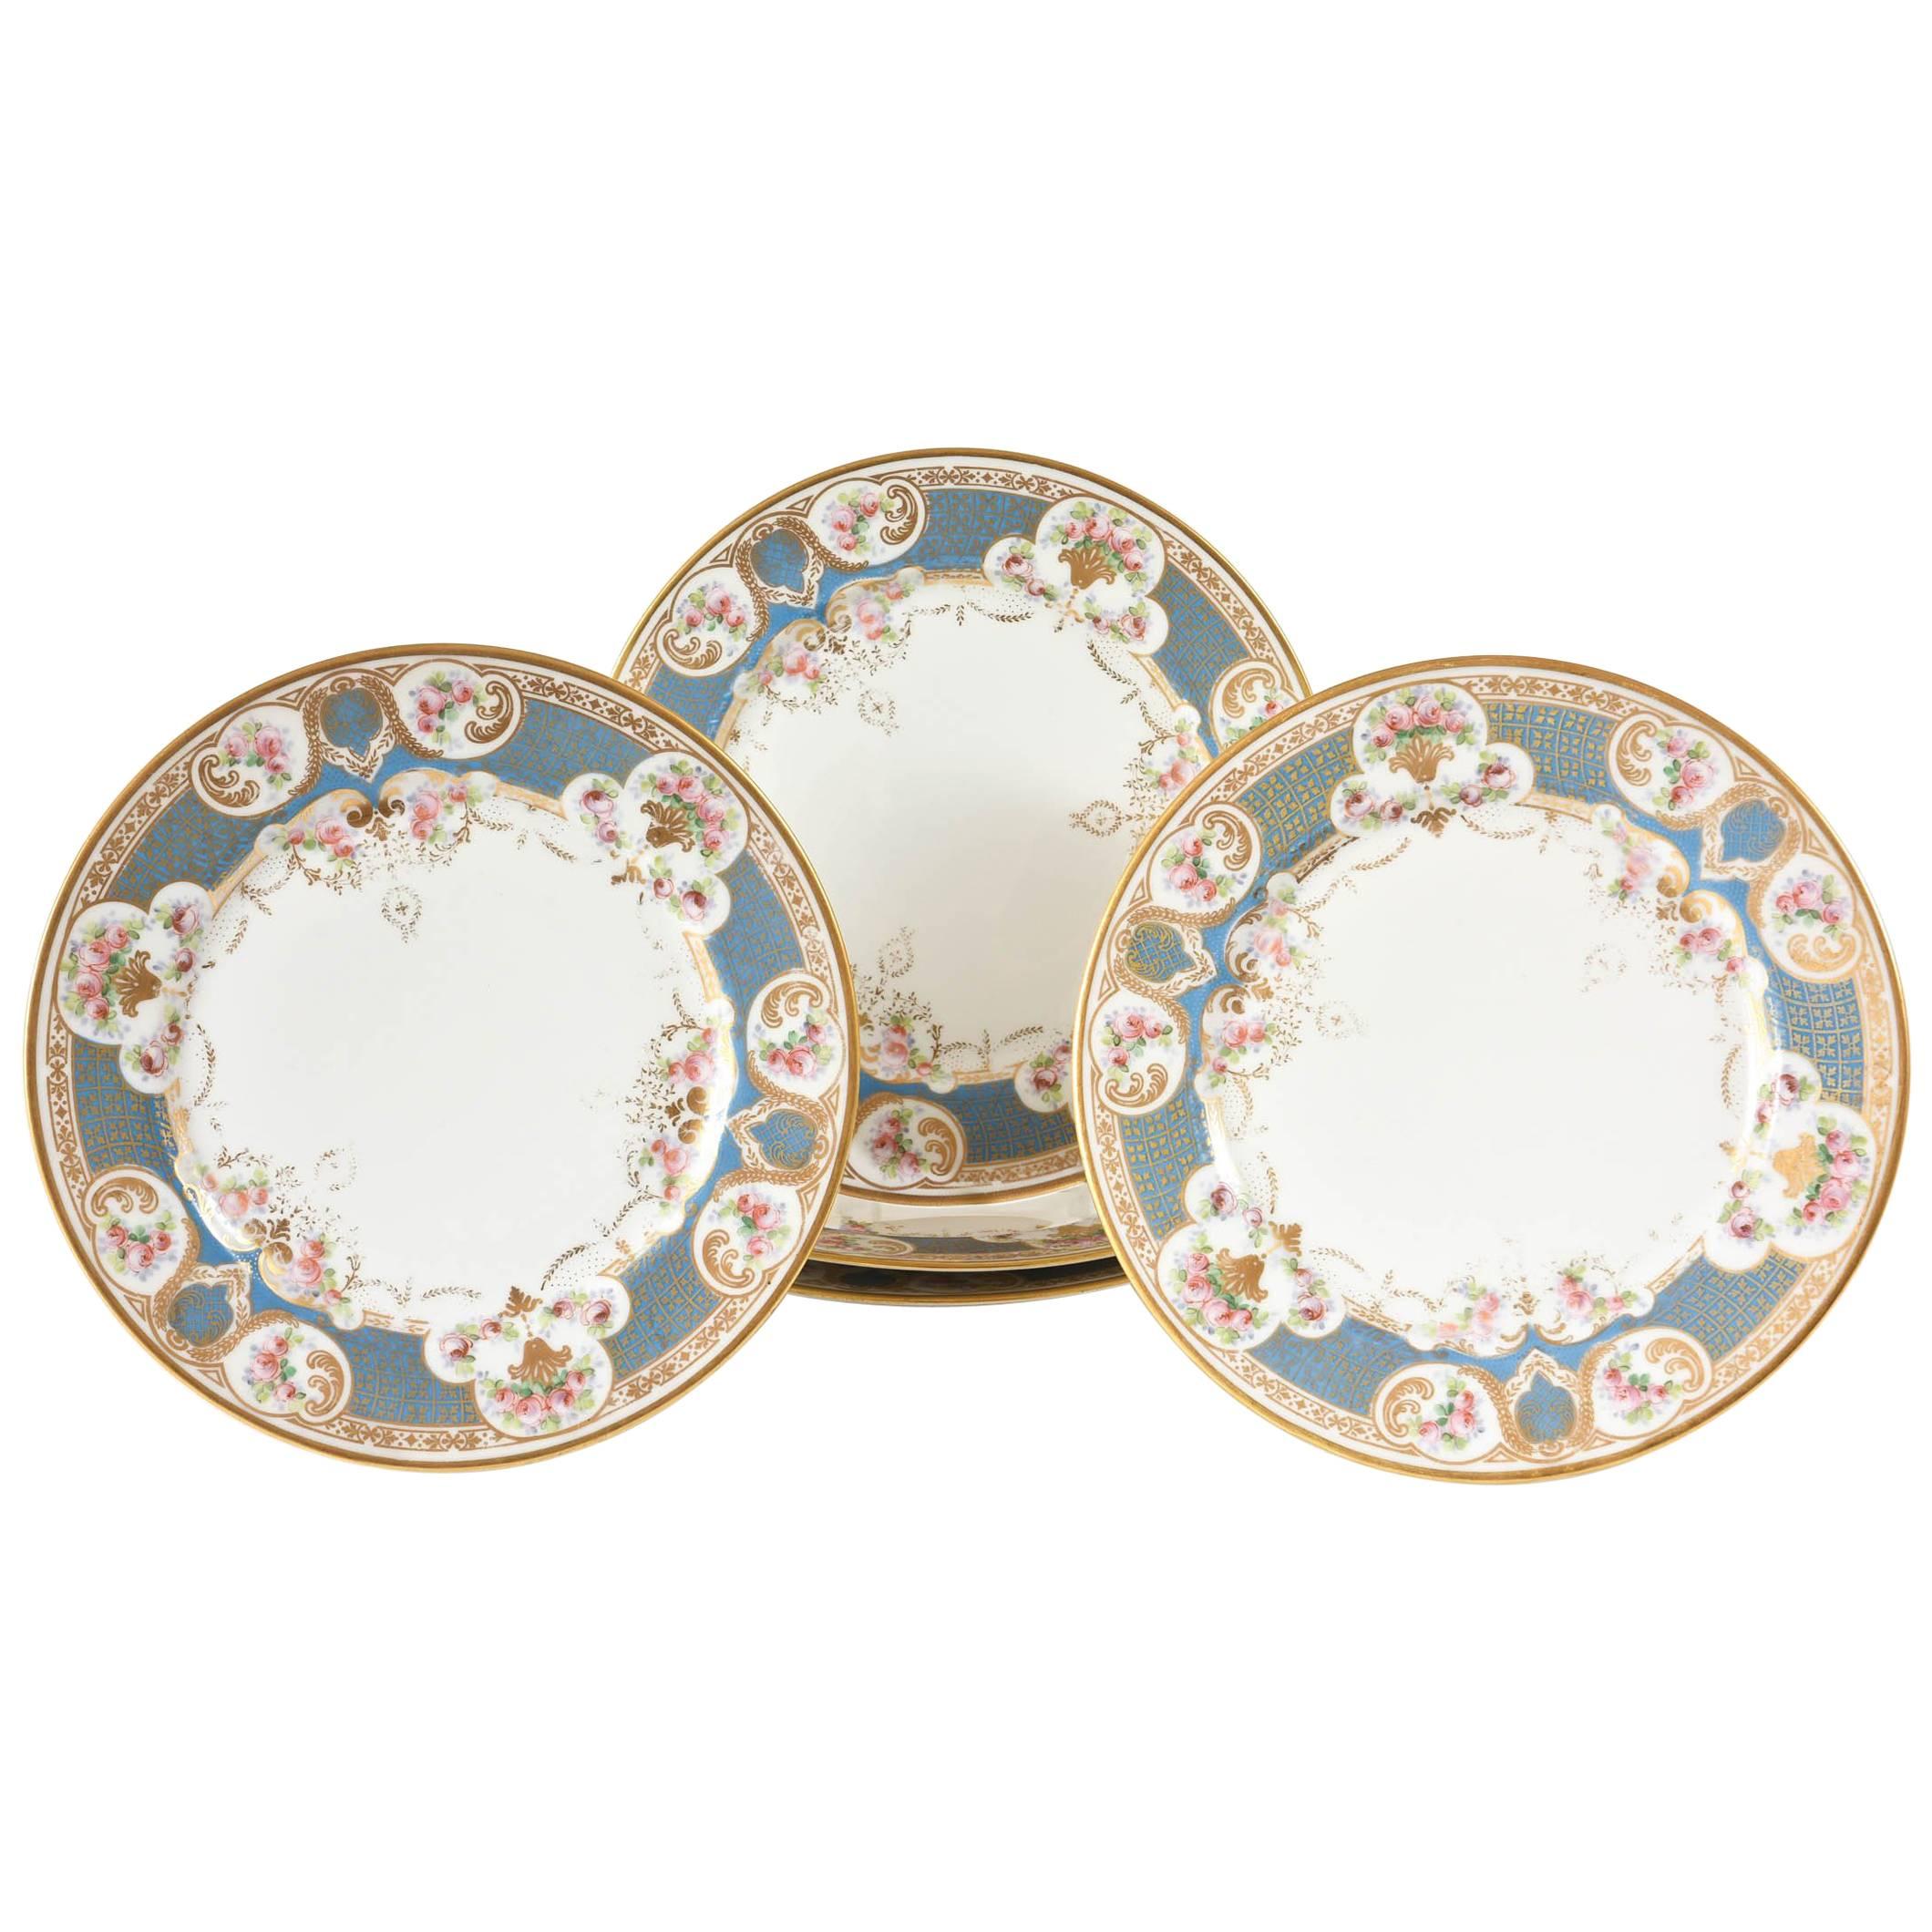 Pretty Turquoise and Rose Pink Dinner Plates, Antique, circa 1900